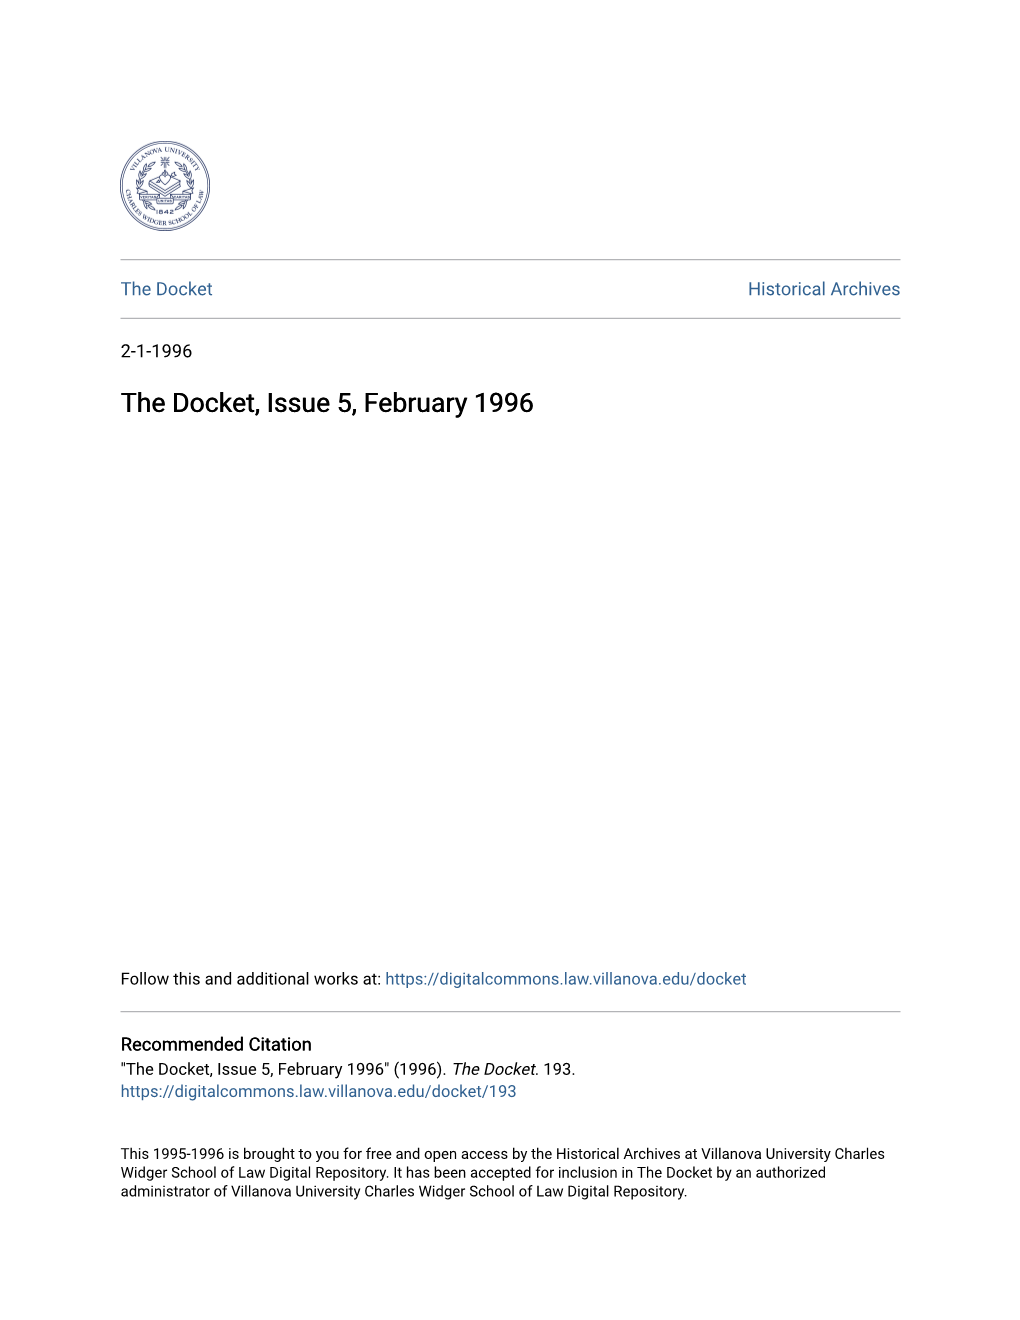 The Docket, Issue 5, February 1996